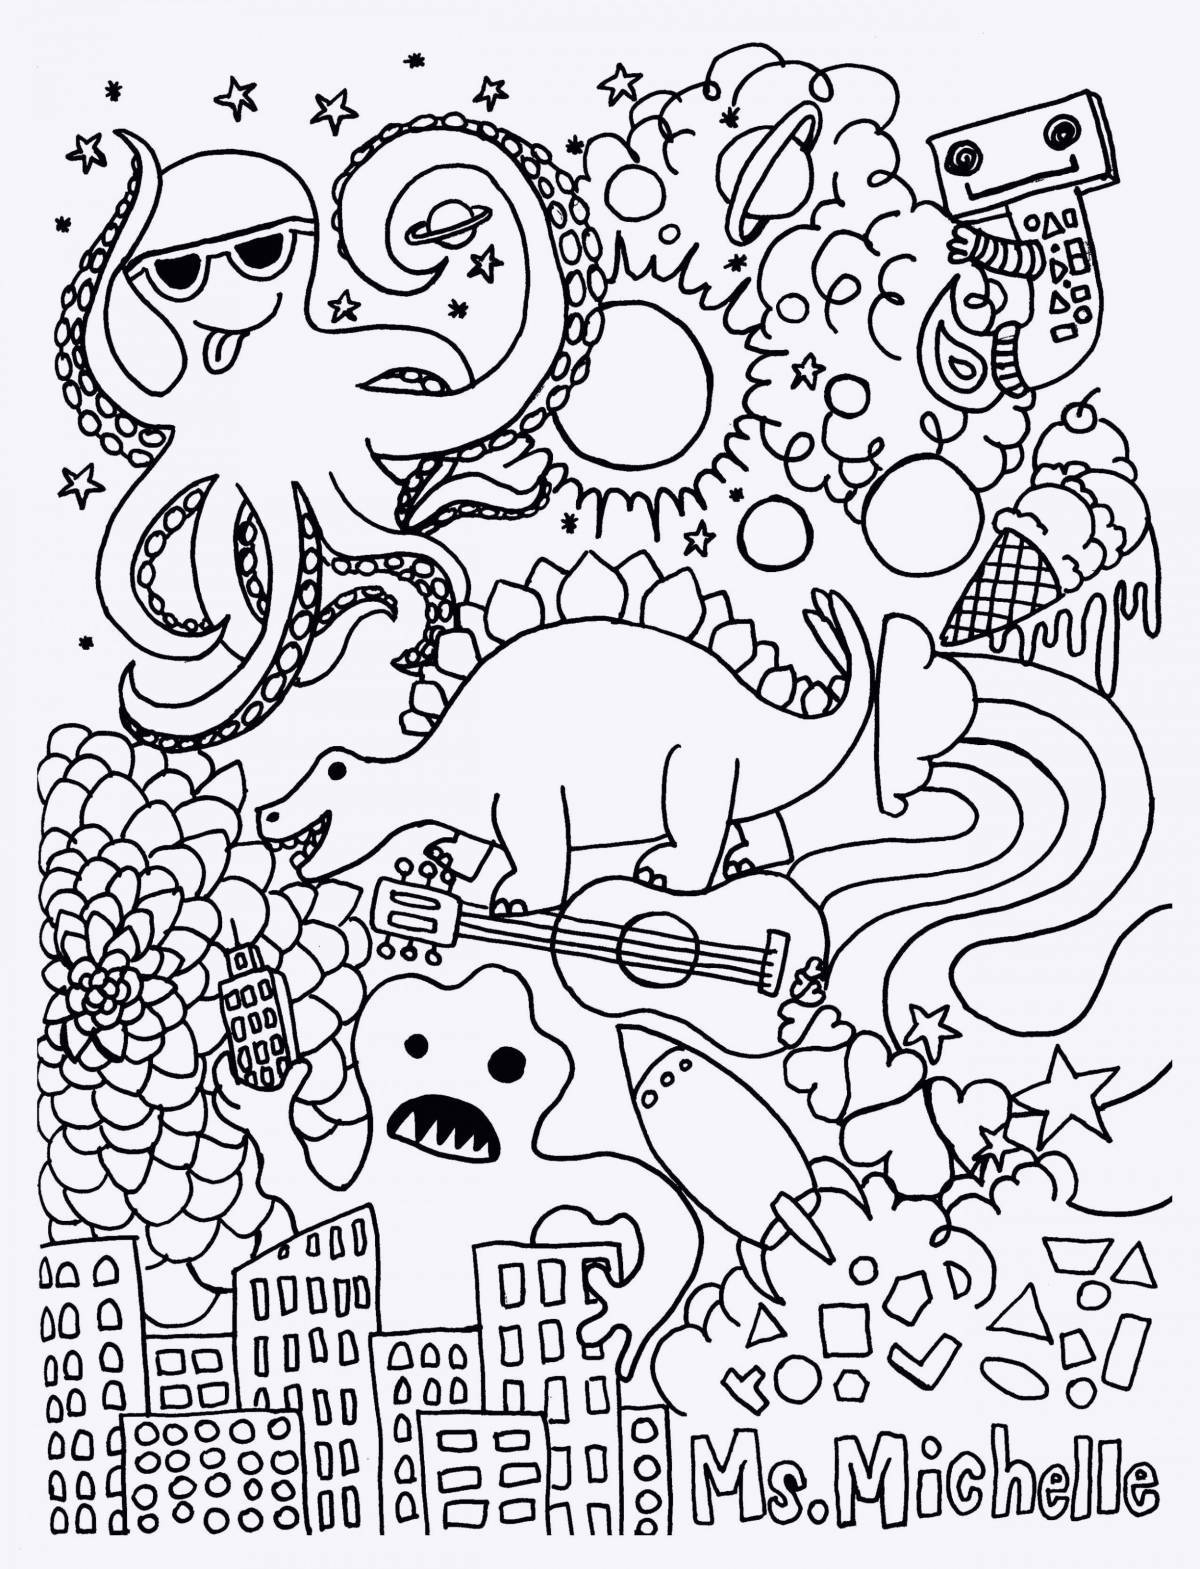 Coloring-riddle coloring page wall indie kid